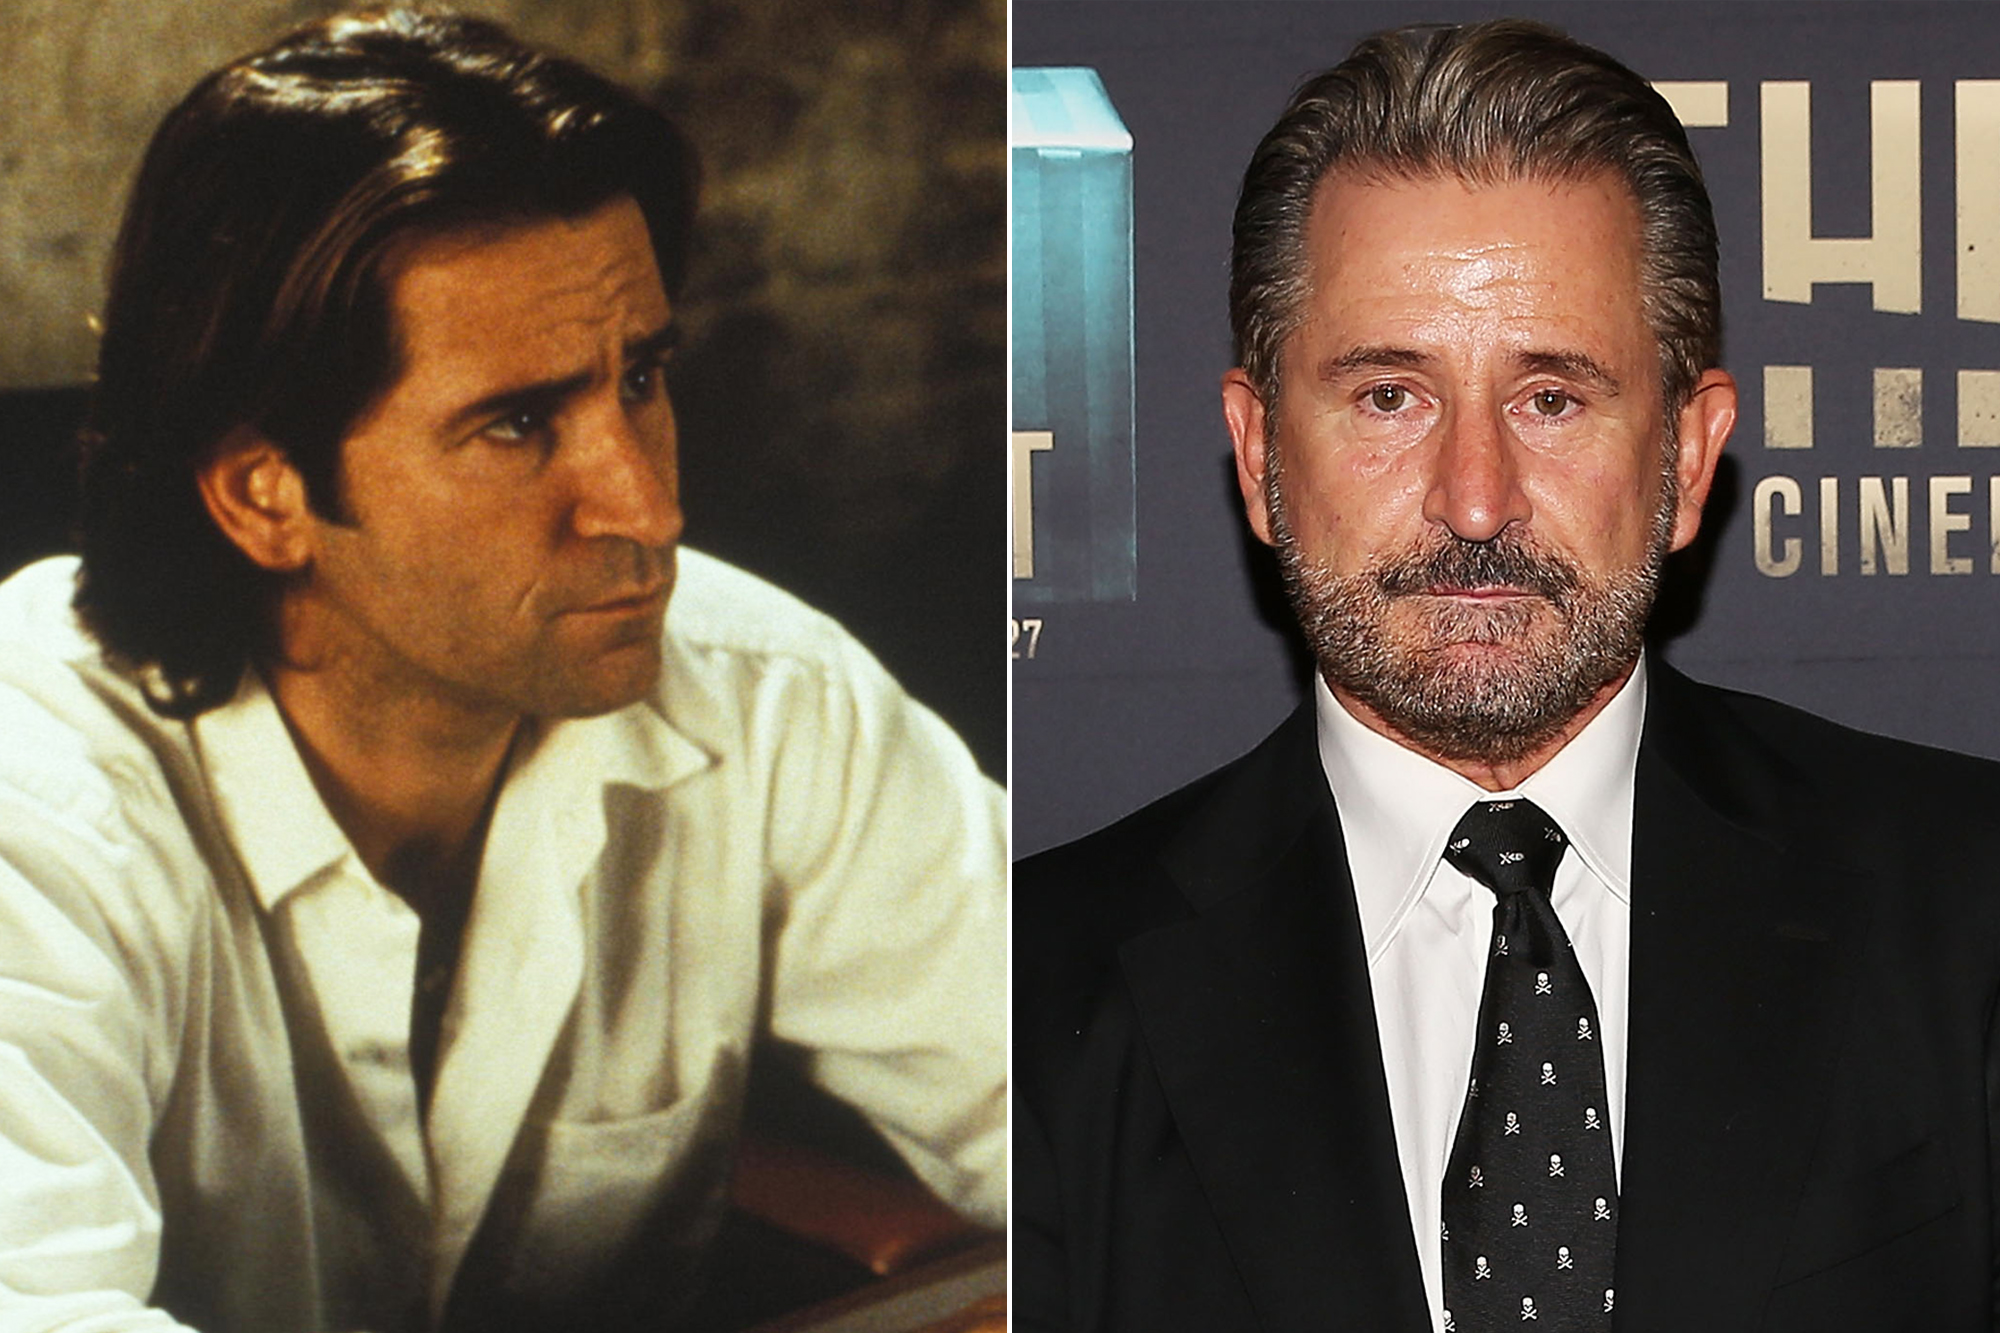 Anthony LaPaglia, who played store manager Joe Reaves, nabbed an Emmy for his role as Daphne Moon's brother Simon on 'Frasier' and later won a Golden Globe for his leading role as Jack Malone on the television series 'Without a Trace.'